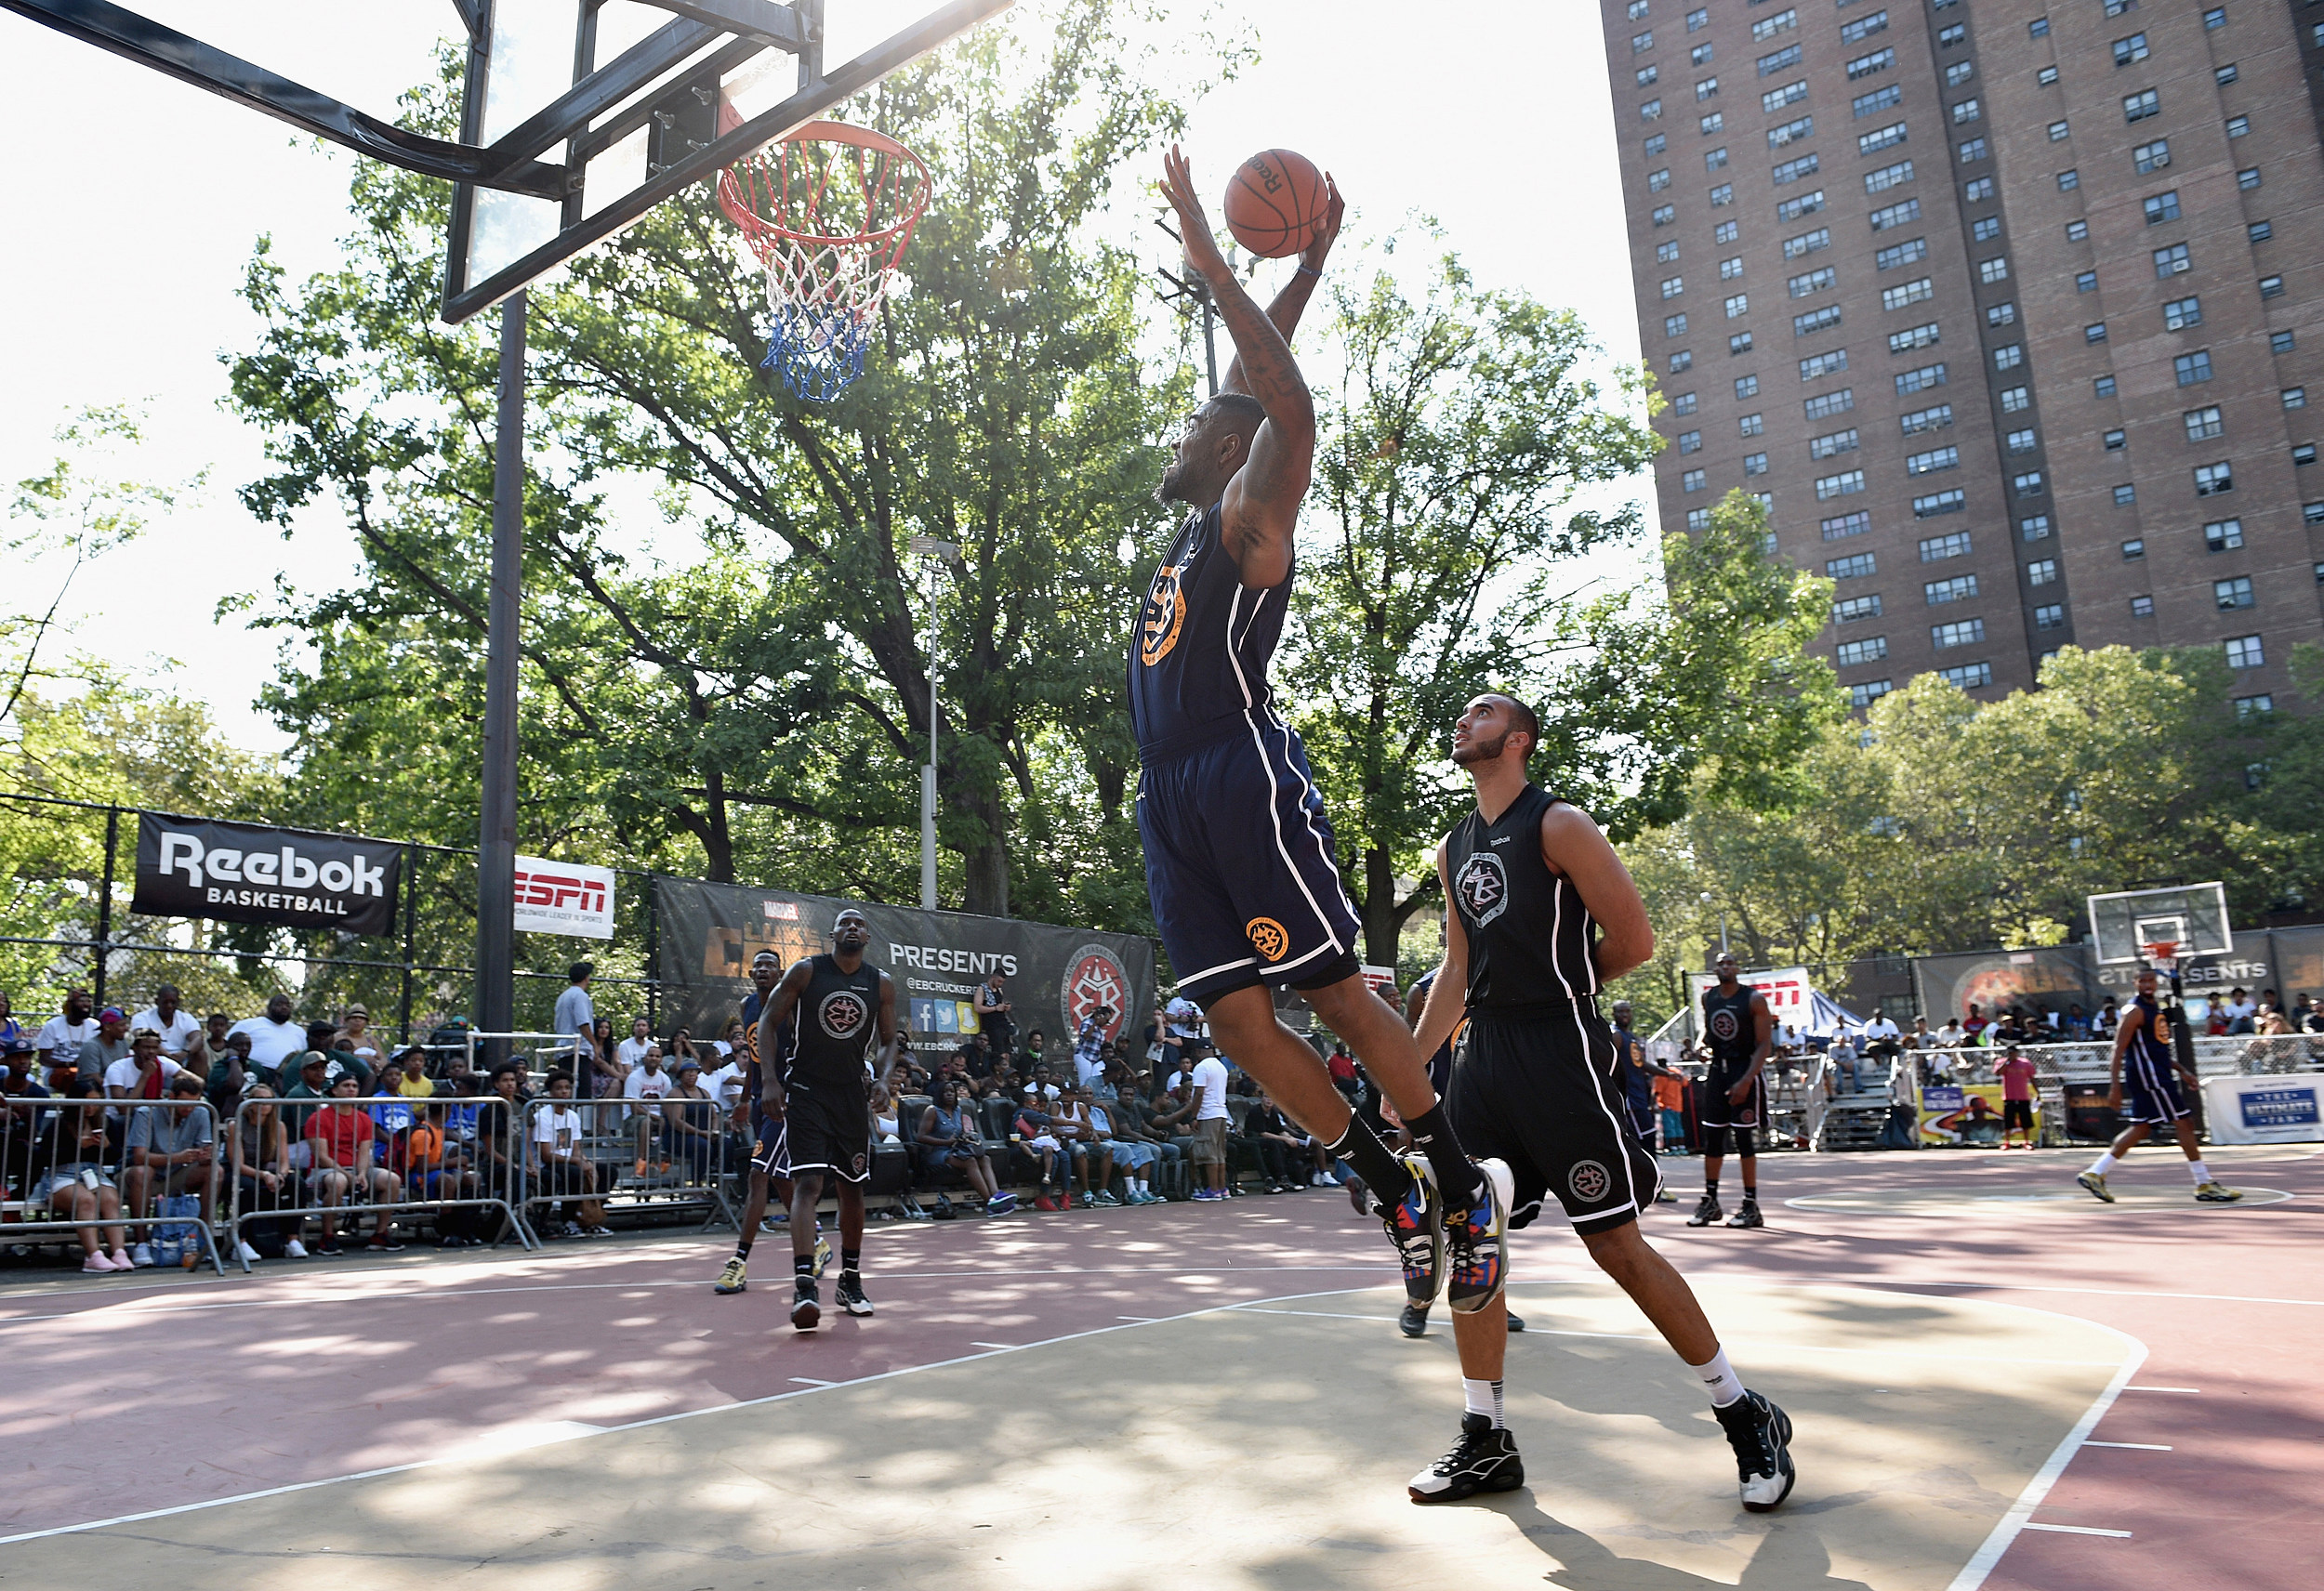 Get a Unique Look at NYC Street Ball with This Airbnb Experience